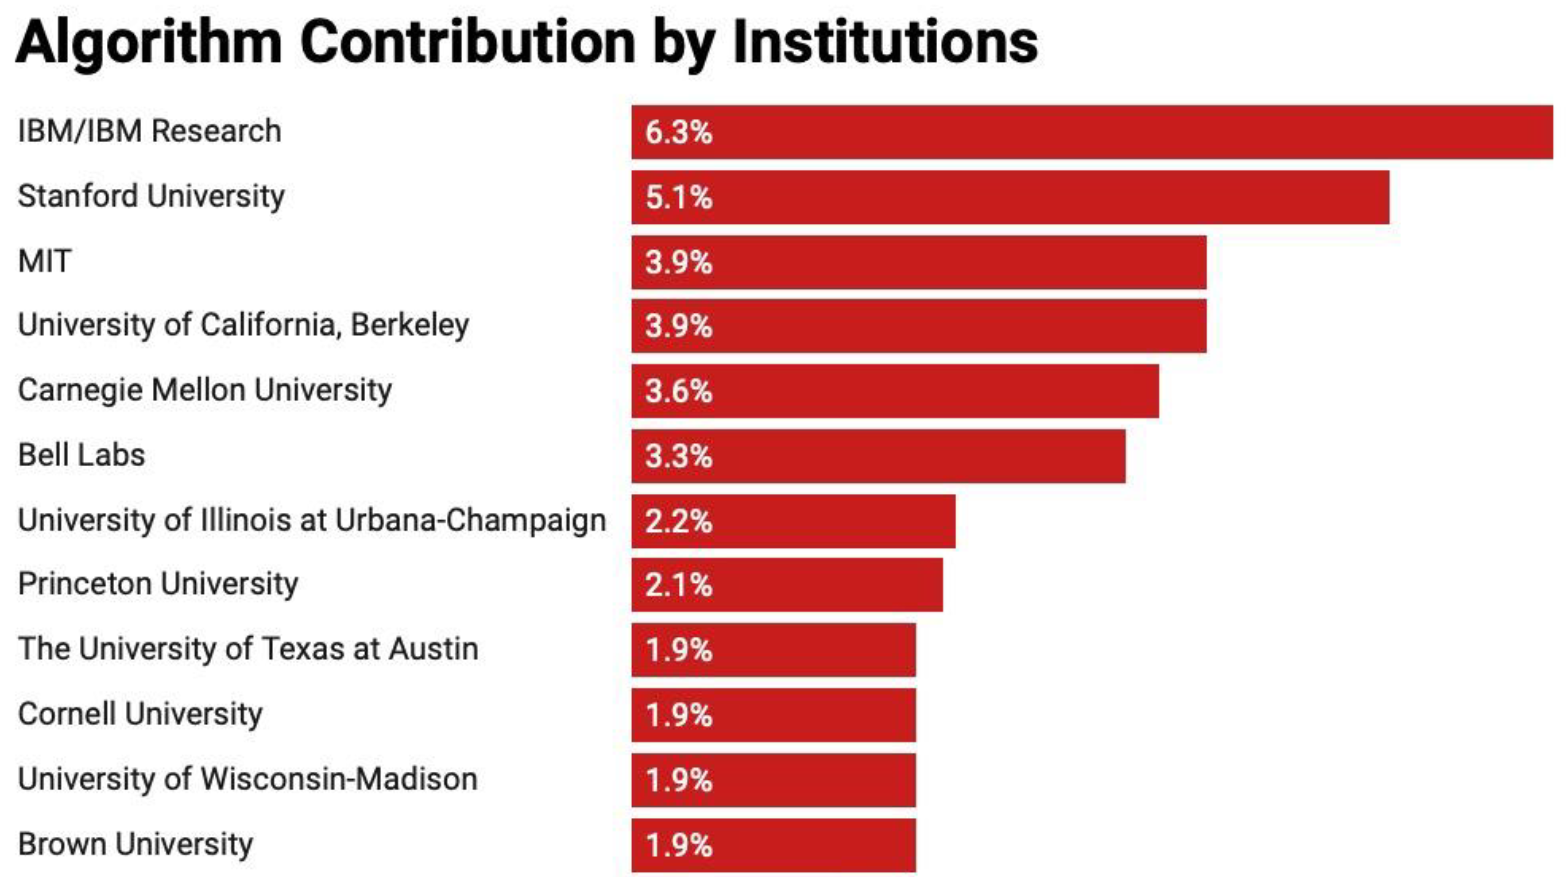 Algorithmic contribution by specific non-profit institution